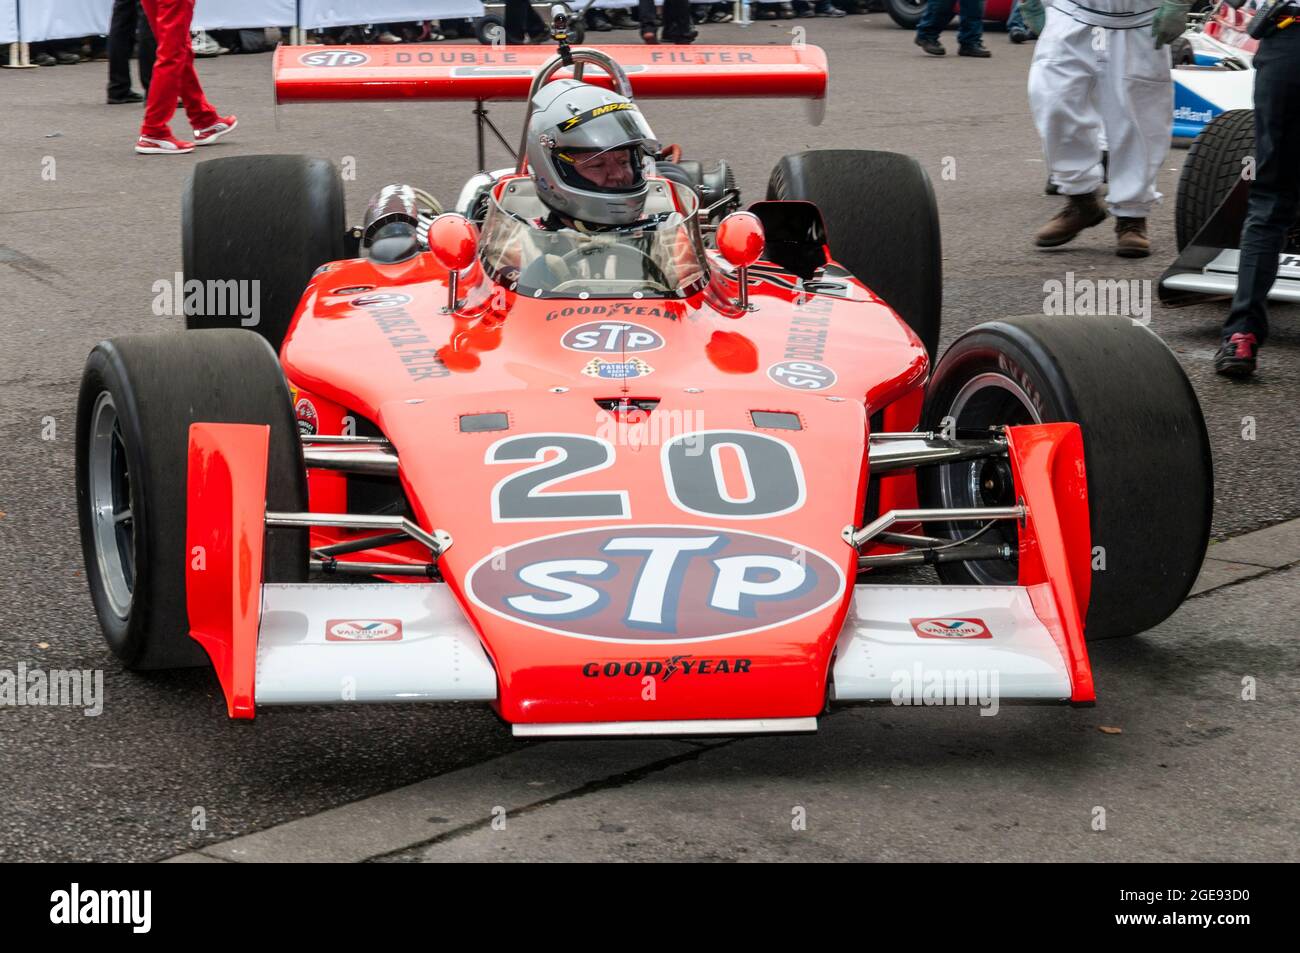 Eagle 7200 Offenhauser STP Indy 500 at the Goodwood Festival of Speed motor racing event 2014. Driving out from paddock Stock Photo